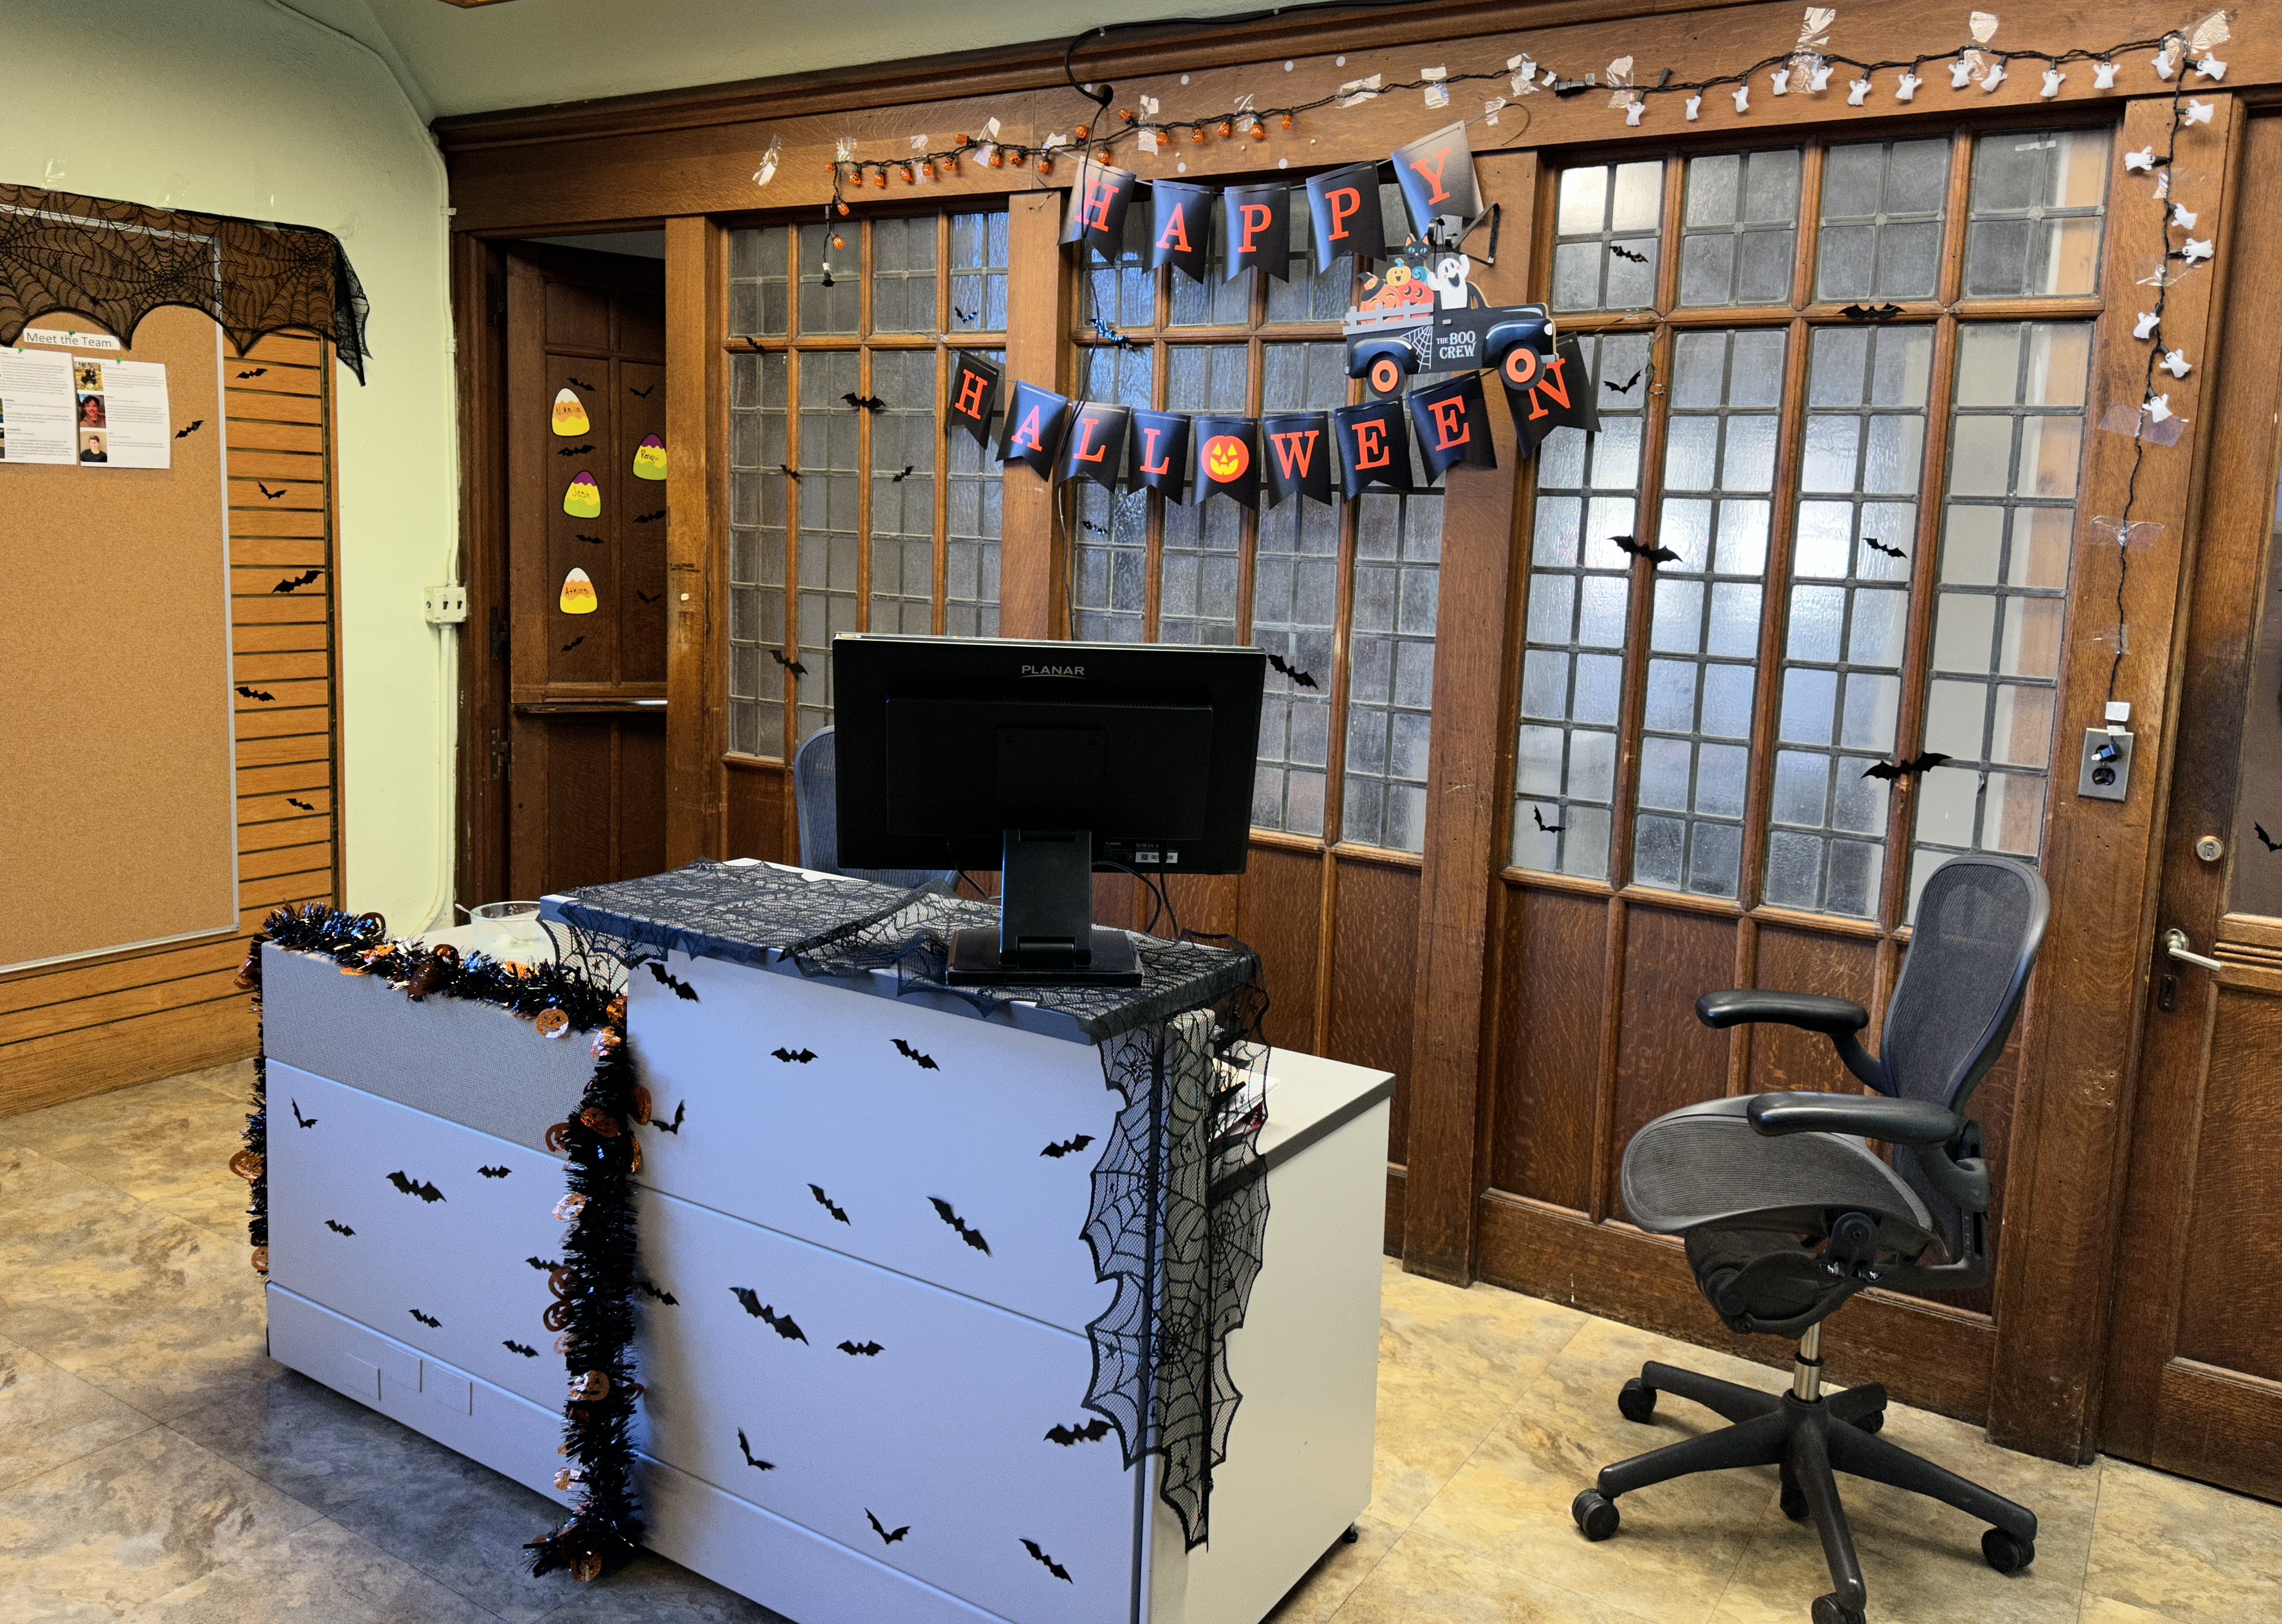 A desk and rolling office chair in front of a wood and frosted glass wall. Halloween decorations include a Happy Halloween banner on the wall, and a spiderweb drape and paper bats on the desk